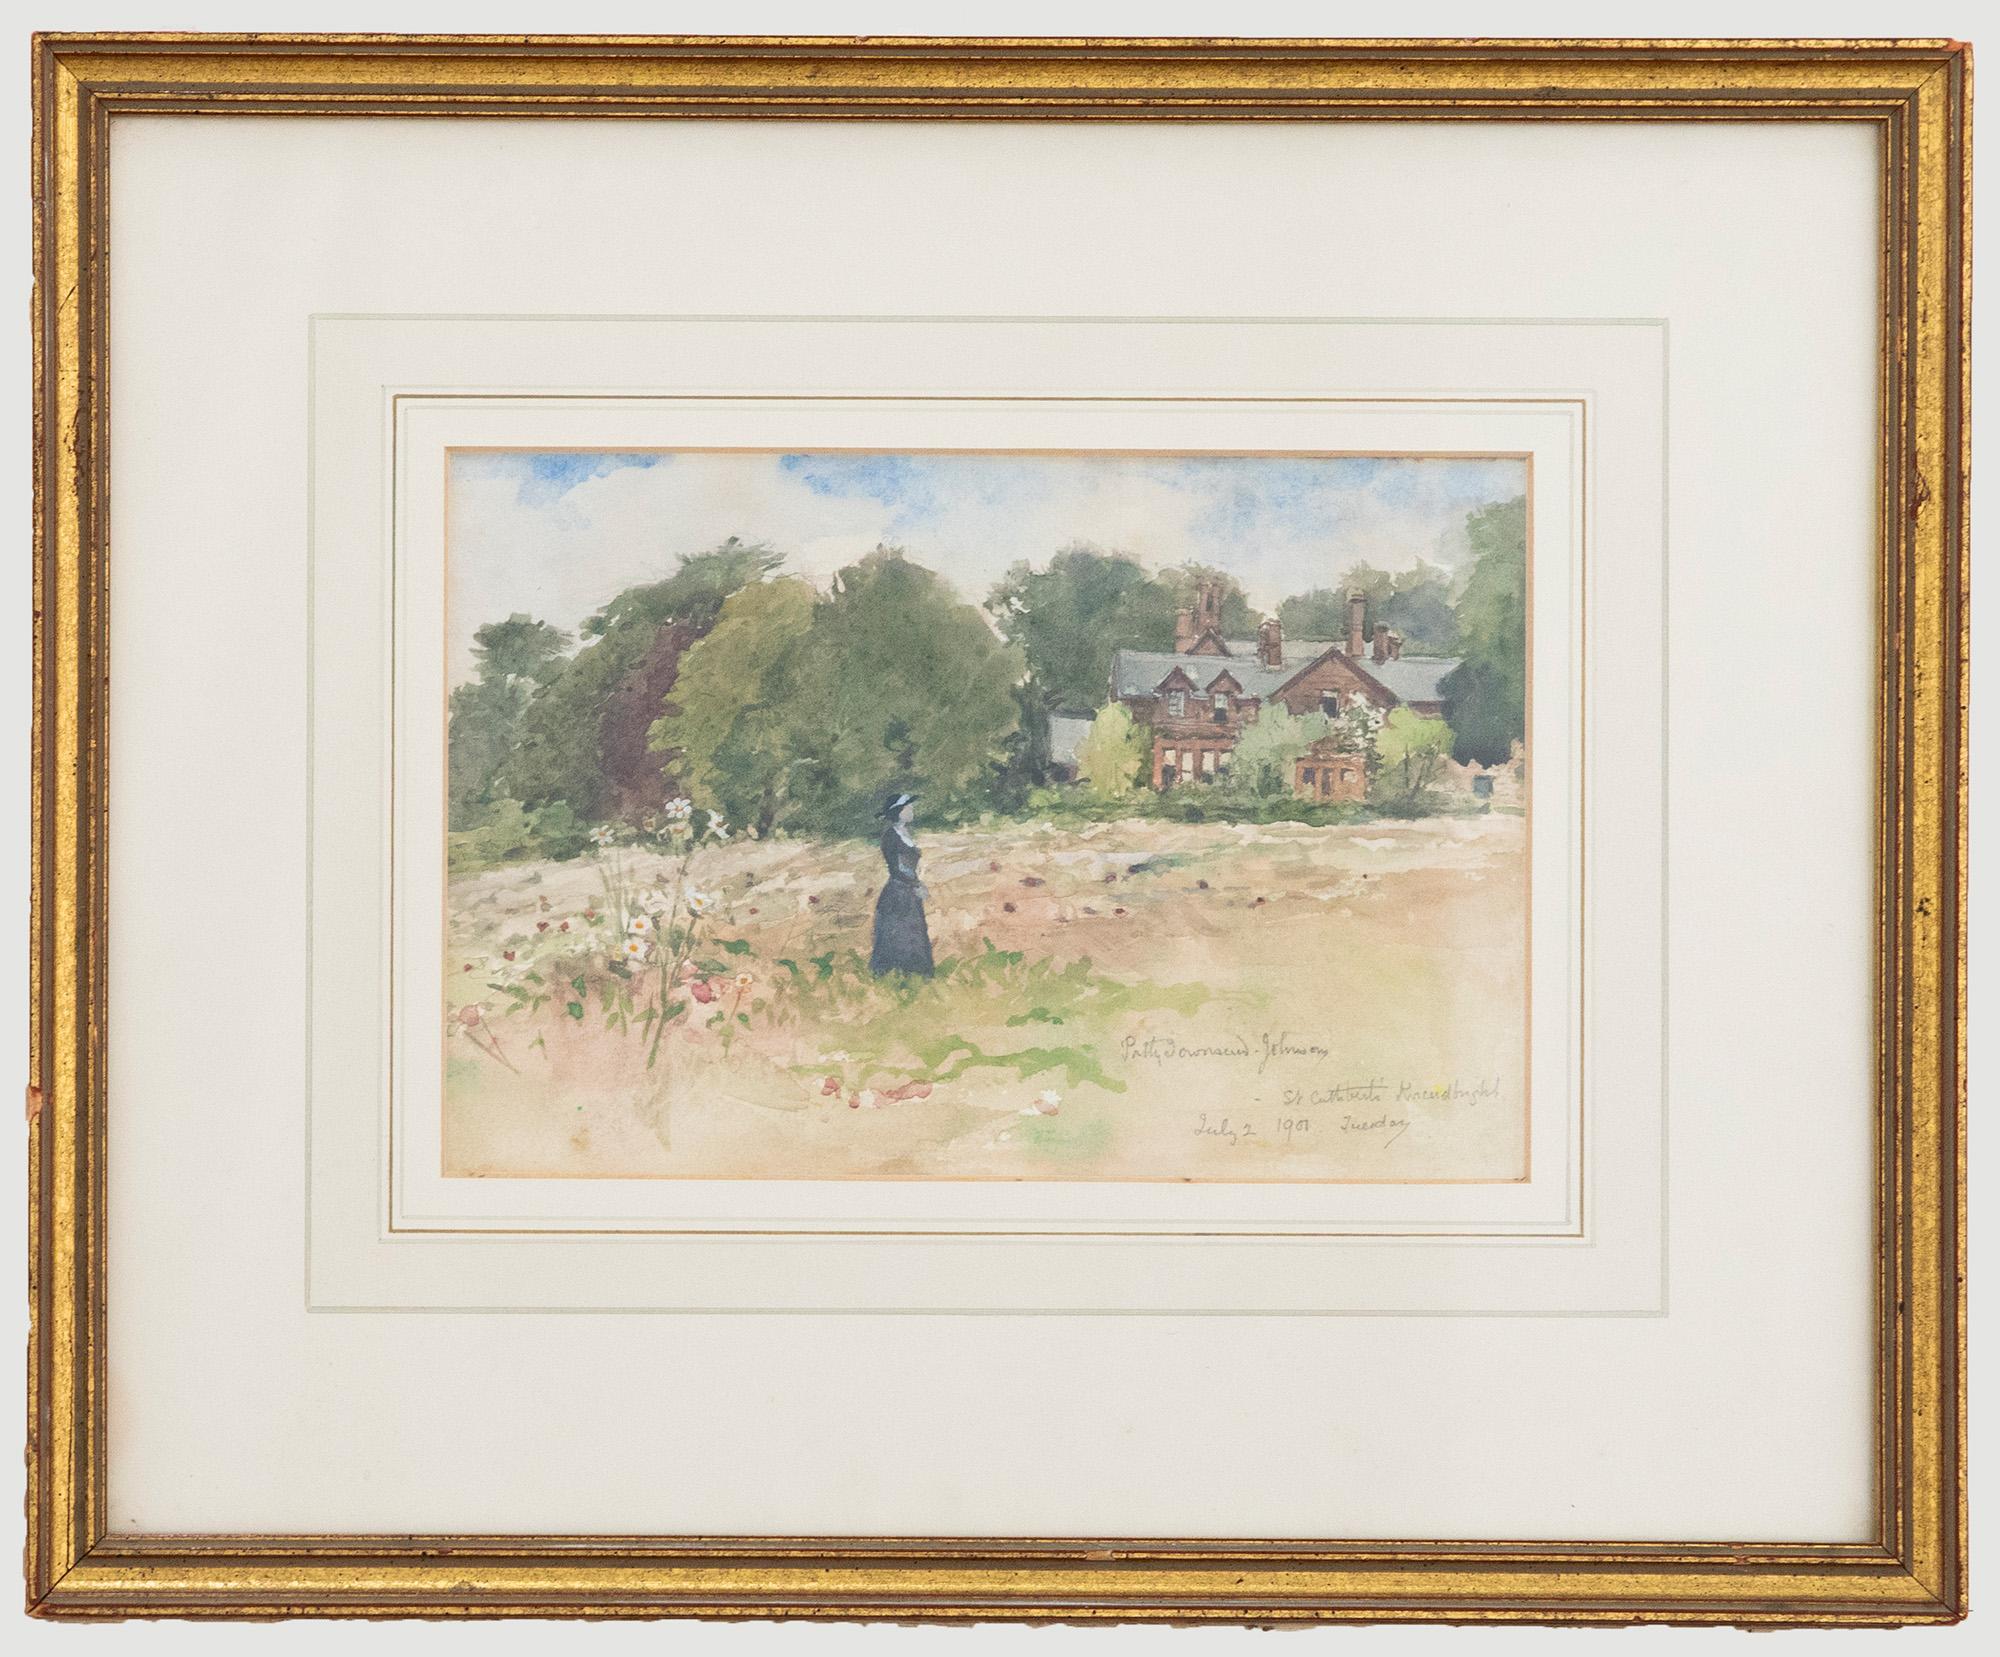 A delightful watercolour scene of a lady in black strolling the wild flower meadow at St Cuthbert's in Kirkcudbright. The watercolour has been signed, inscribed and dated by the artist to the lower right. Well presented in a beautiful wash line